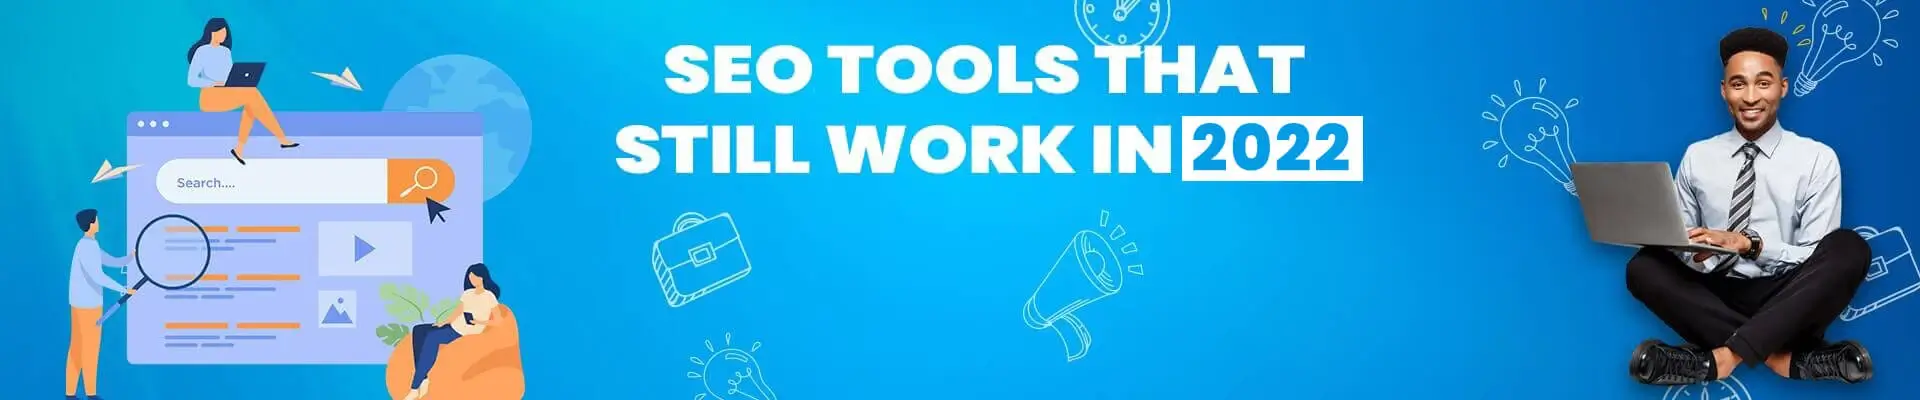 Top 20 Free SEO Tools For 2022 That Improve Your SEO